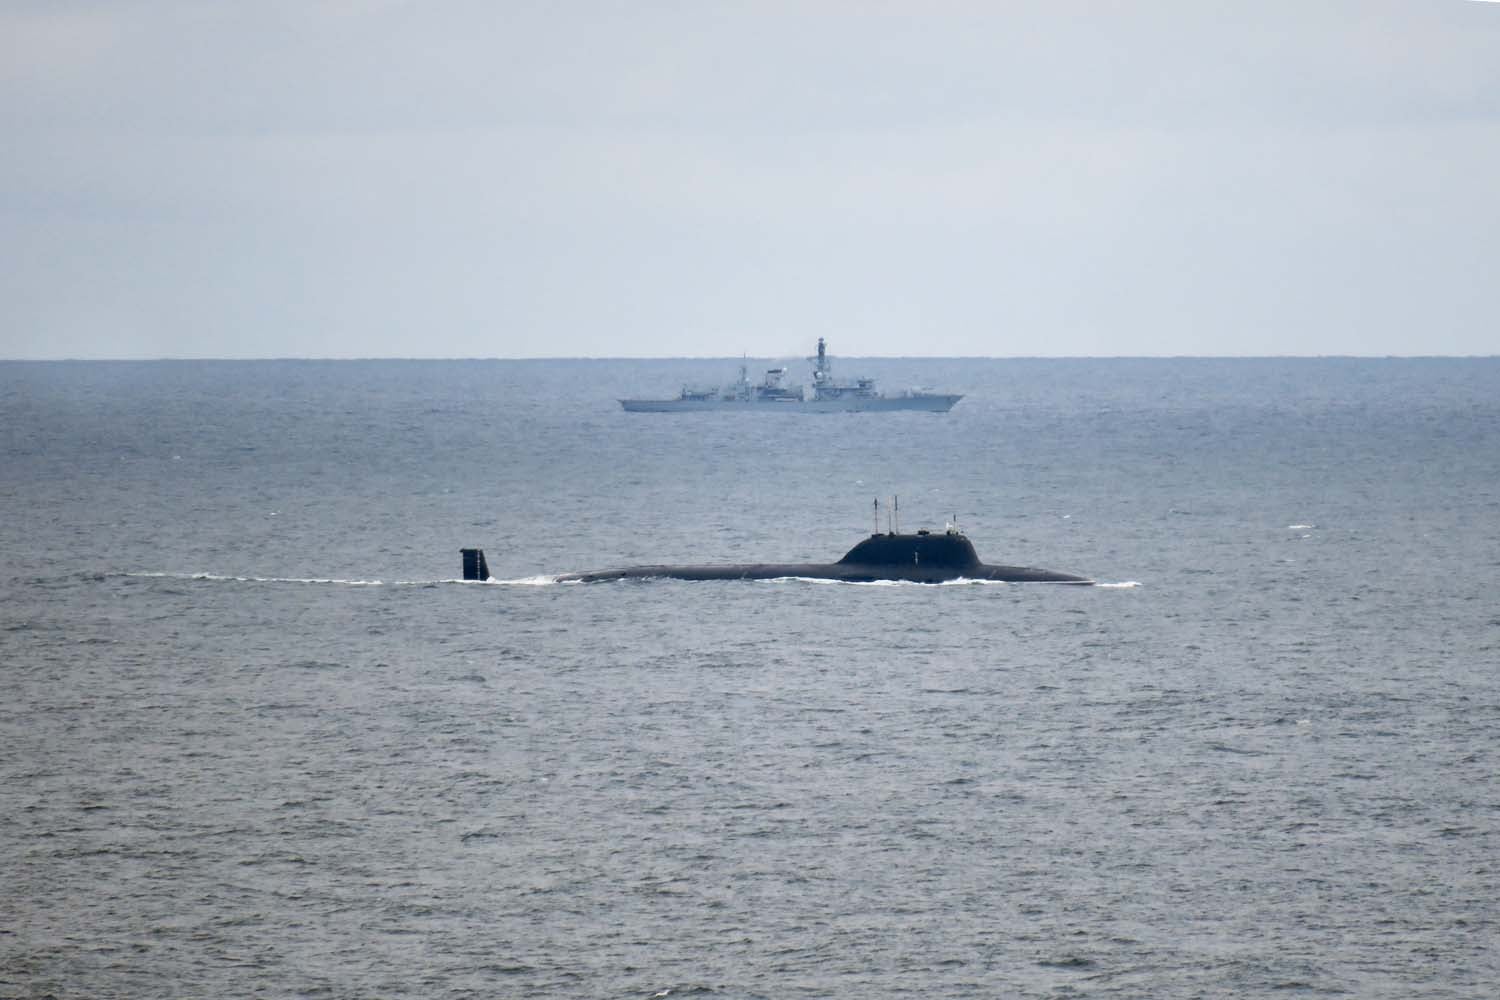 Royal Navy frigate shadowed two Russian submarines in North Sea